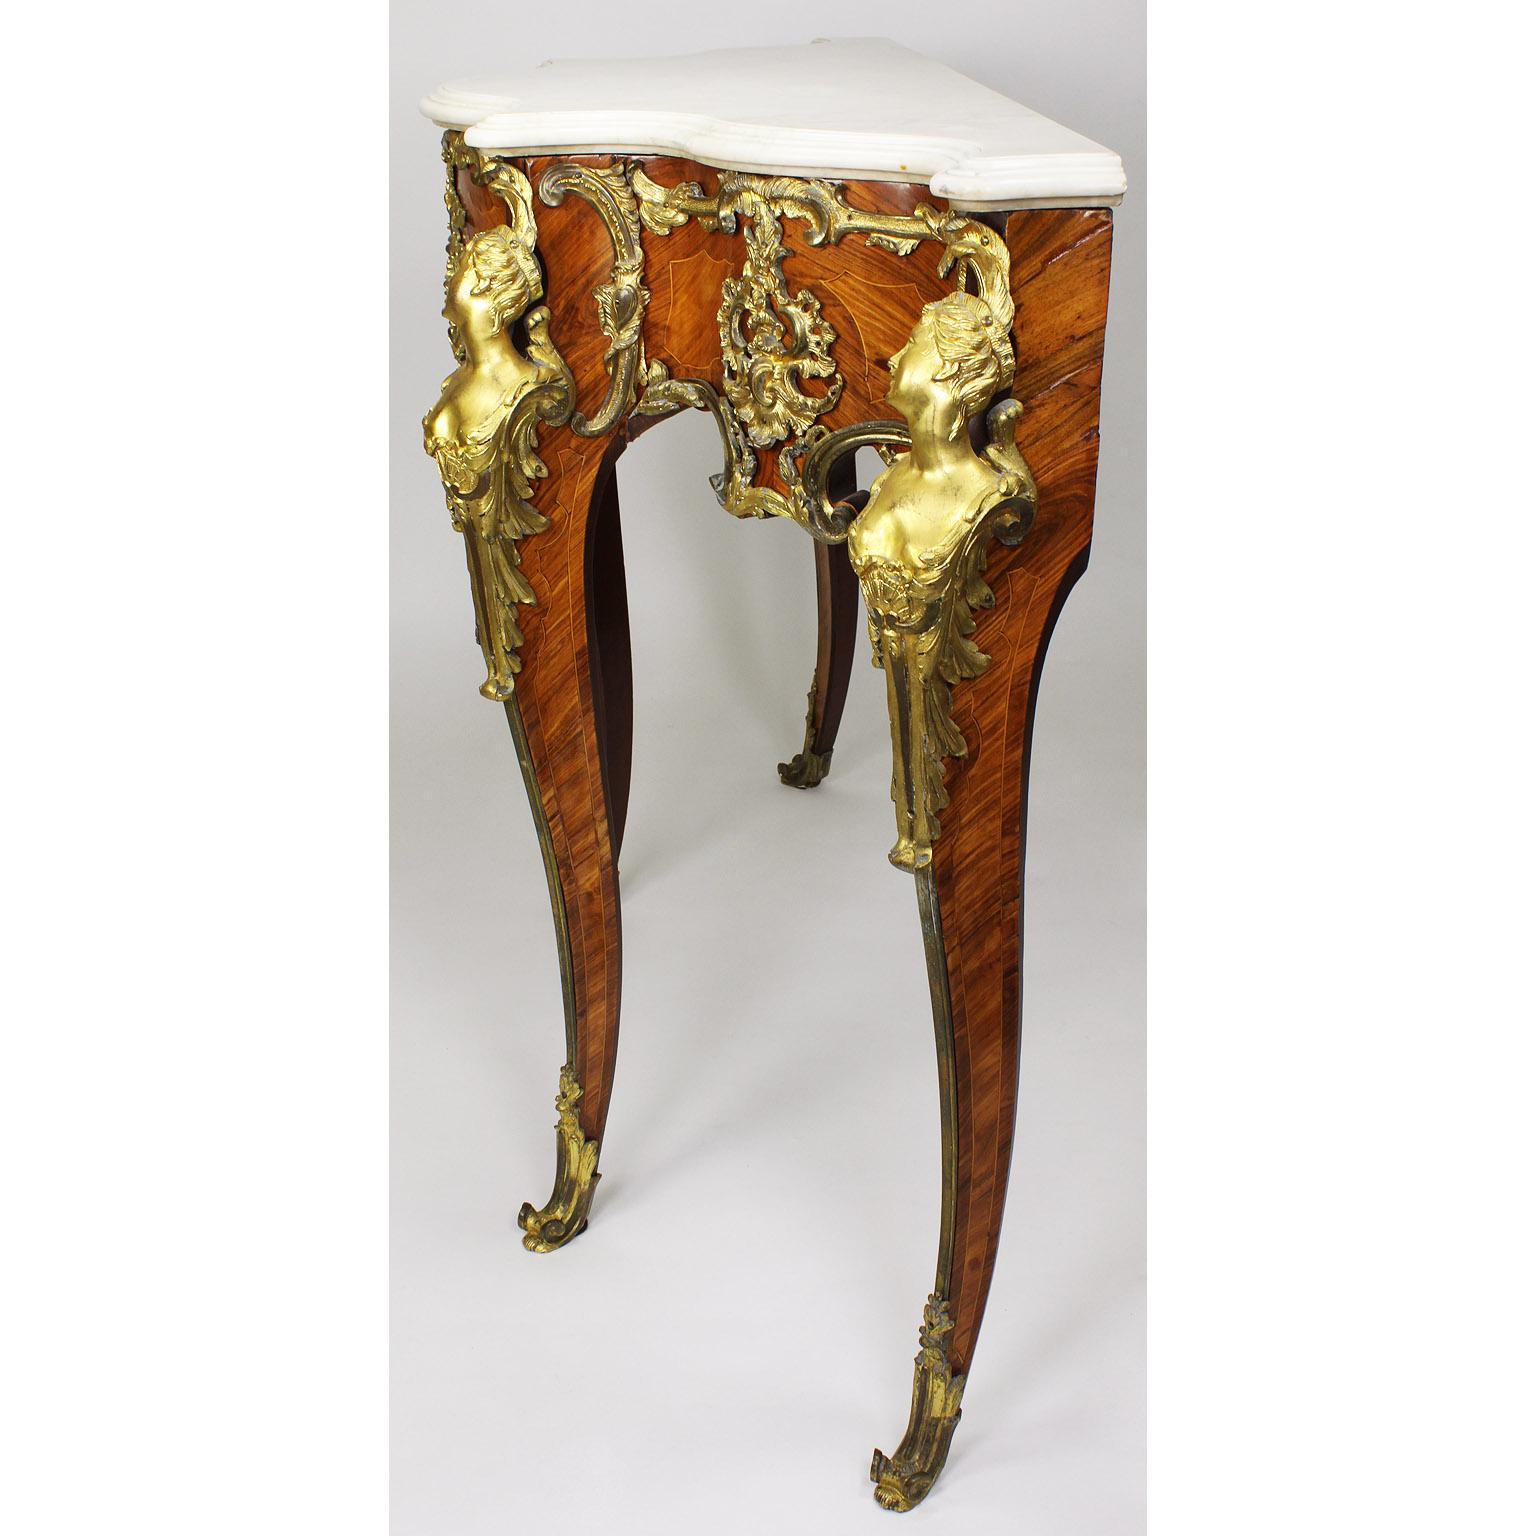 French 19th Century Louis XV Style Ormolu-Mounted Console After Charles Cressent For Sale 4